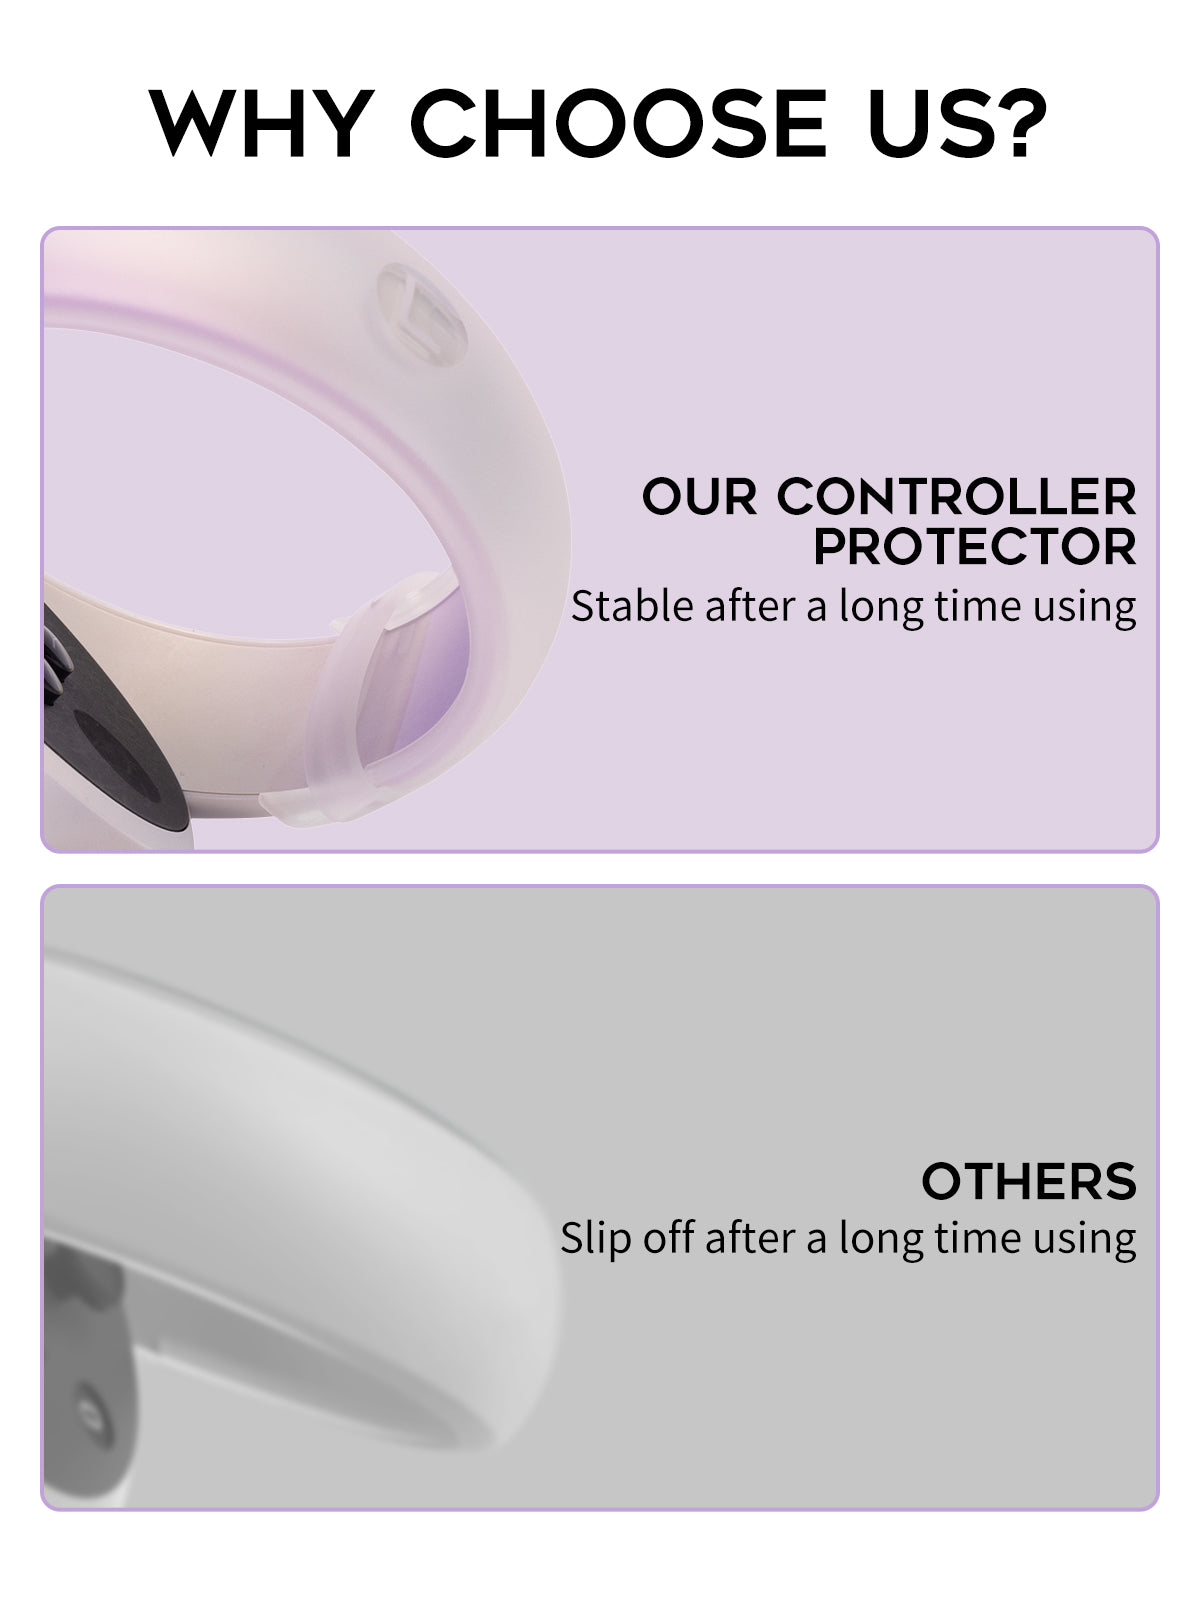 Halo Controller Protector Compatible with Meta/Oculus Quest 2 Accessories, Anti-Bumping Ring with Ant-dropping Clip, Transparent Protective Cover for Enhanced Protection